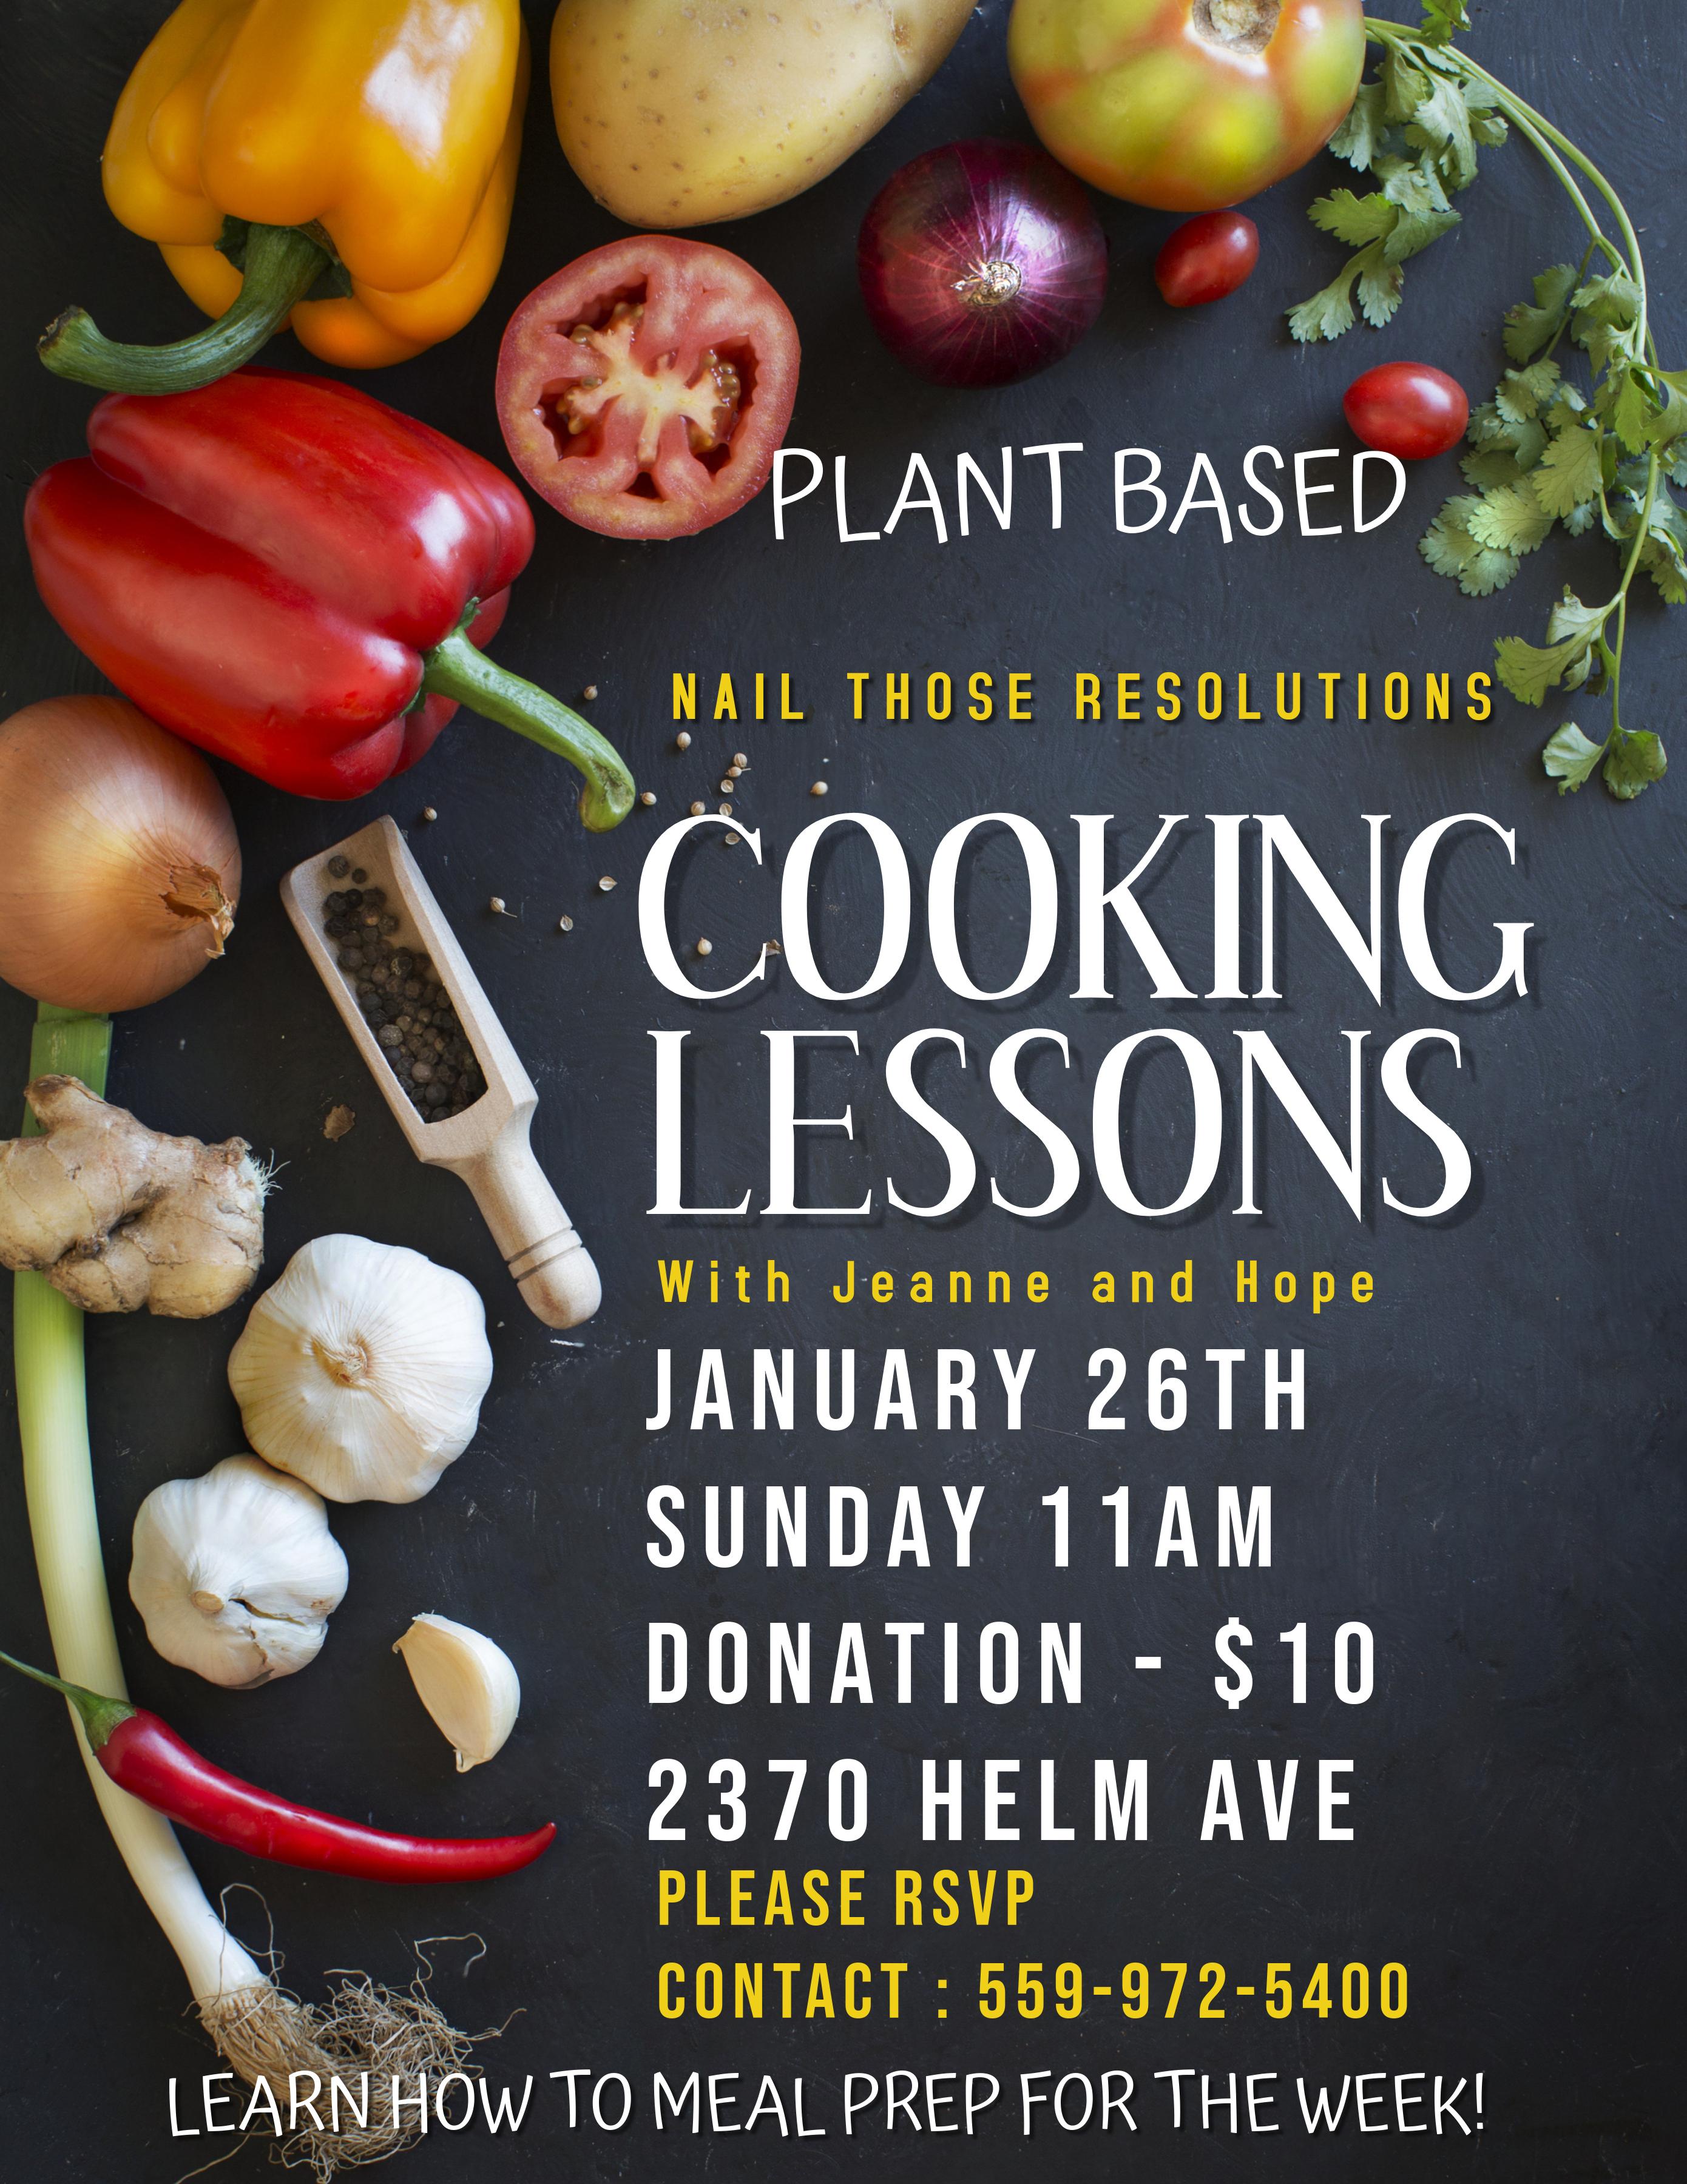 Plant Based Cooking Class